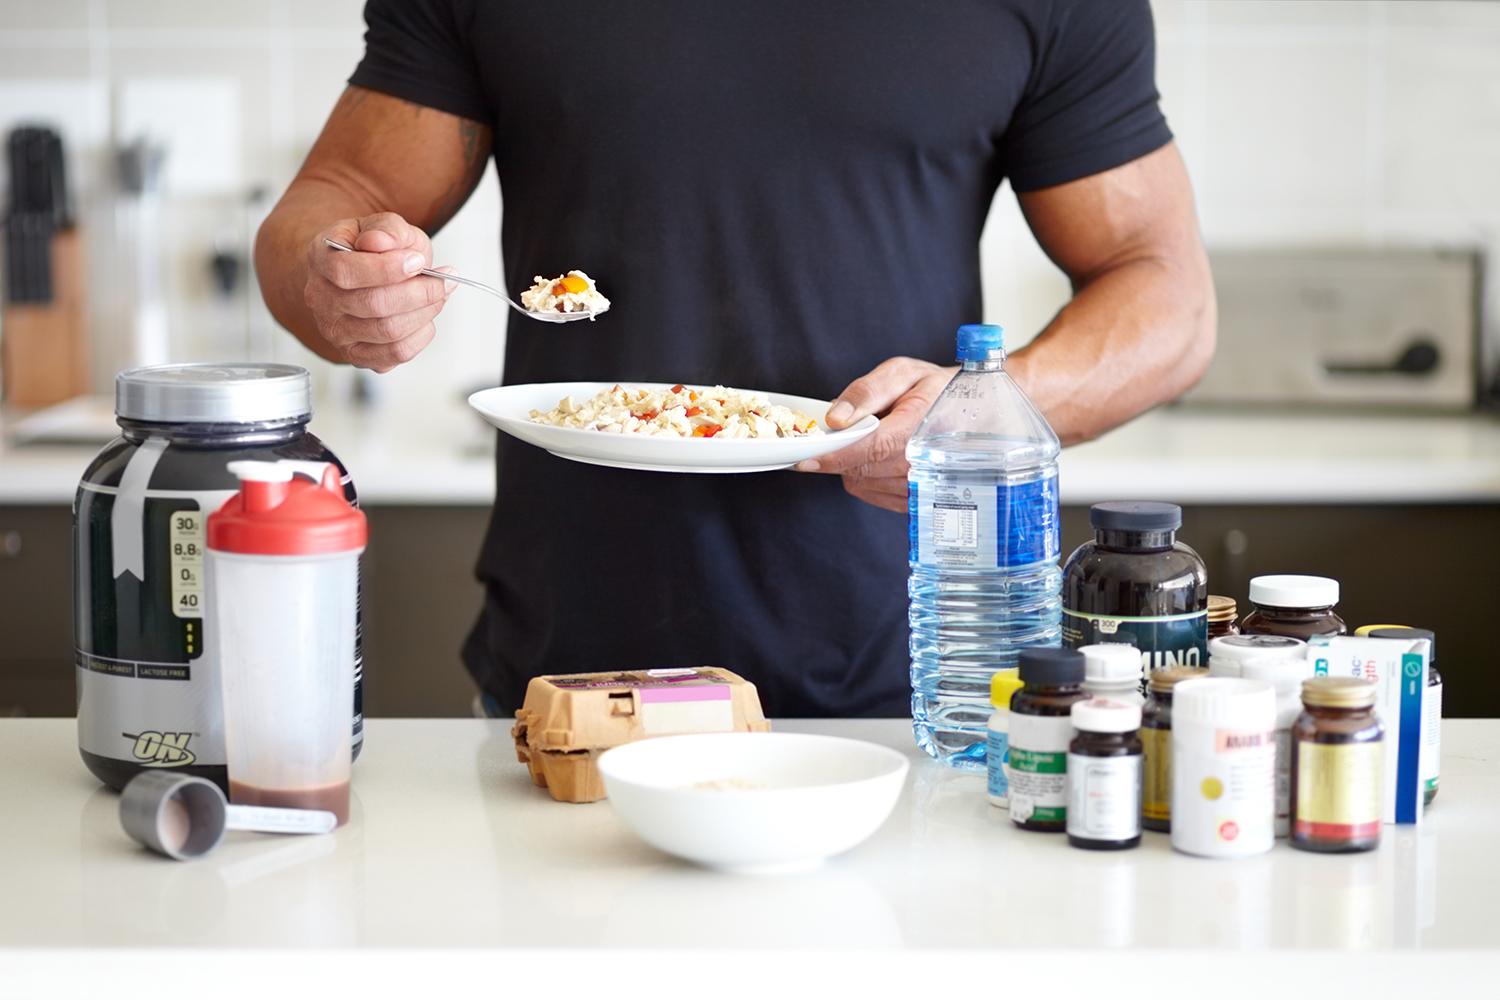 Pre-Workout Foods: Must eat this food before going to the gym, so that energy remains